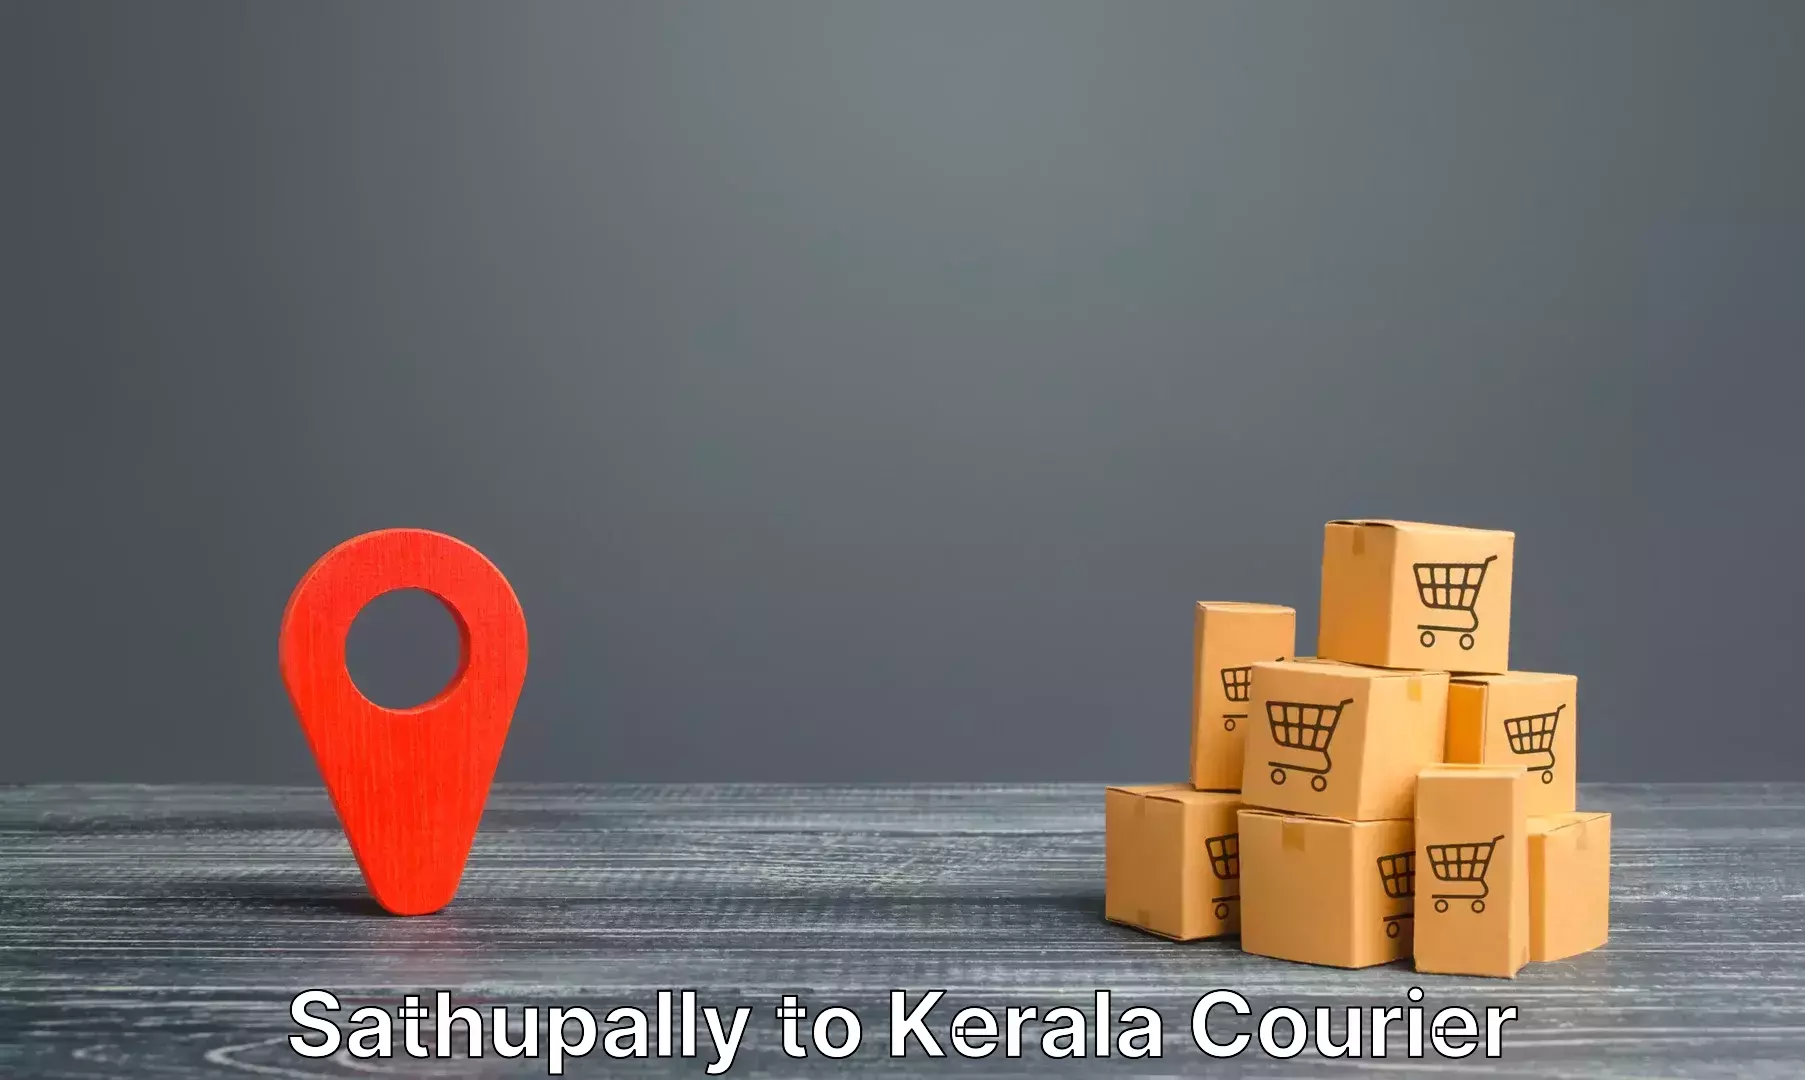 Urgent luggage shipment in Sathupally to Pala